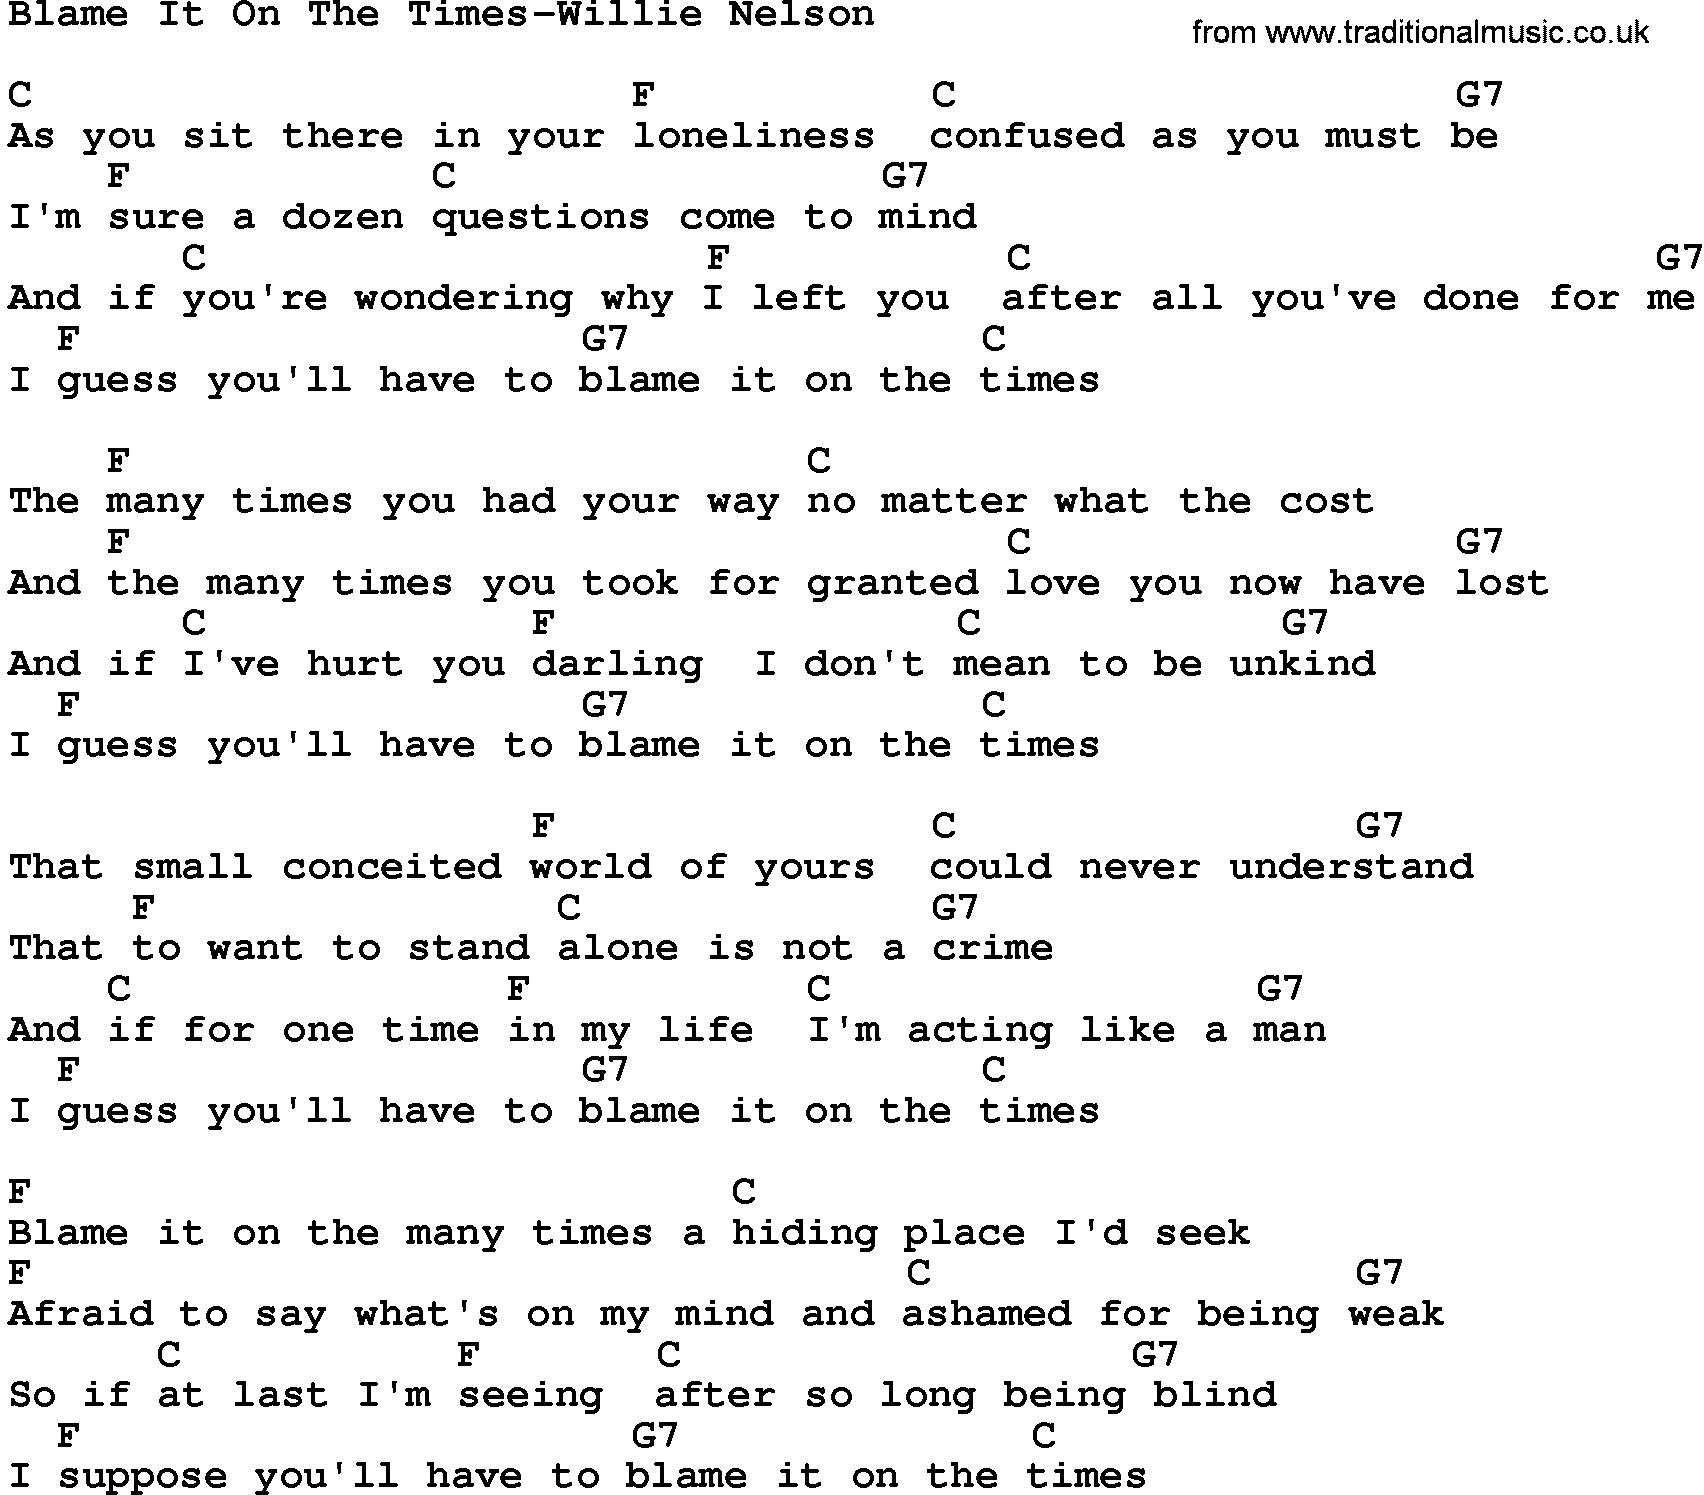 Country music song: Blame It On The Times-Willie Nelson lyrics and chords